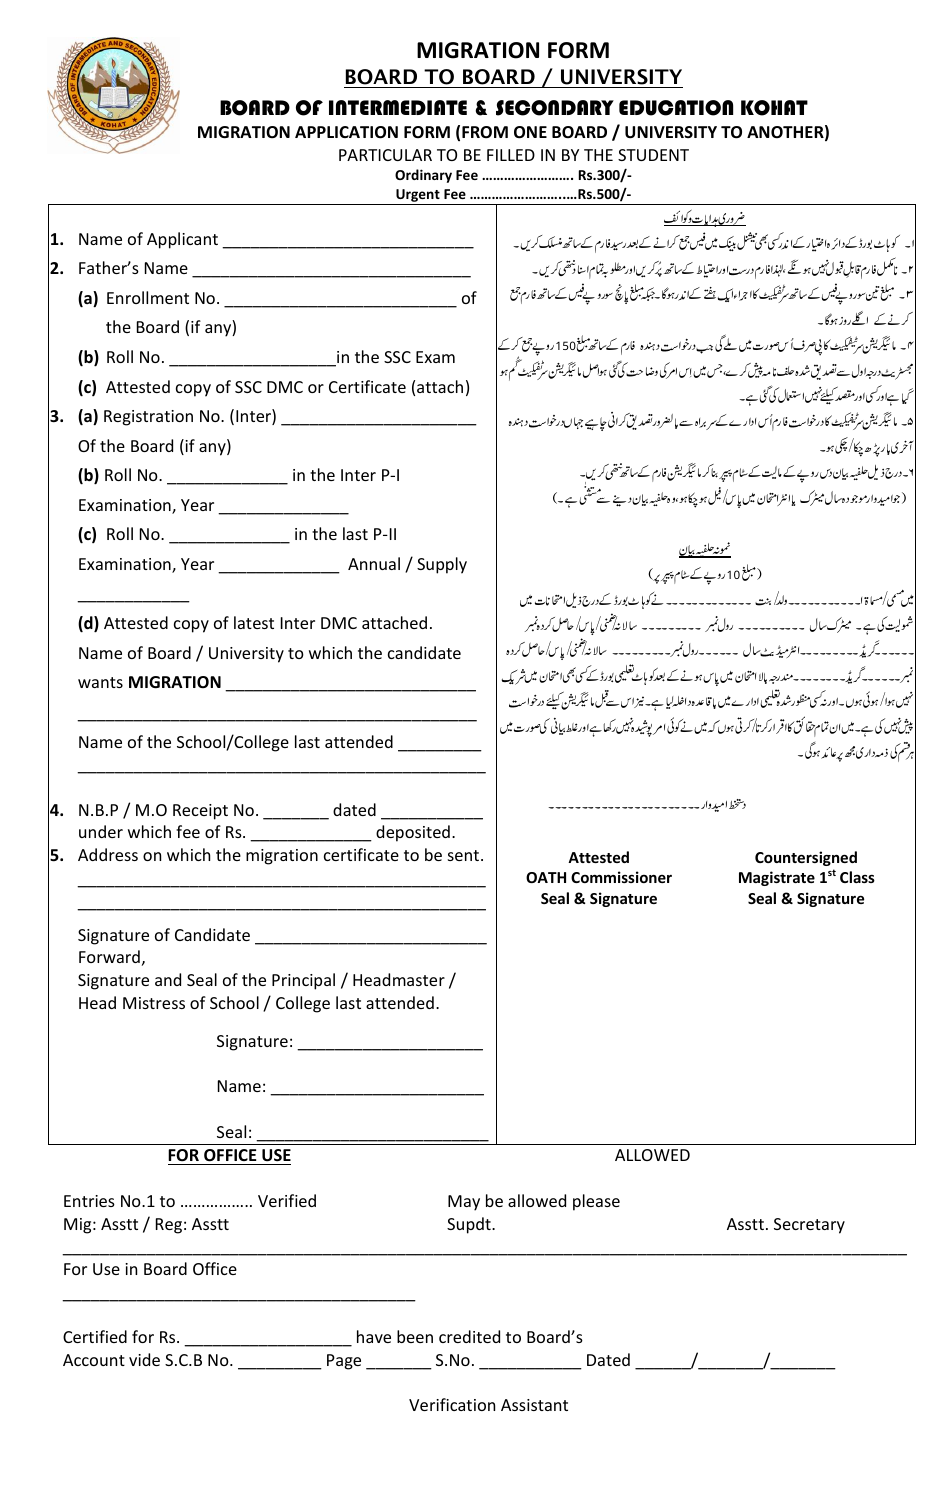 Migration Application Form (From One Board / University to Another) - Khyber-Pakhtunkhwa Province, Pakistan, Page 1